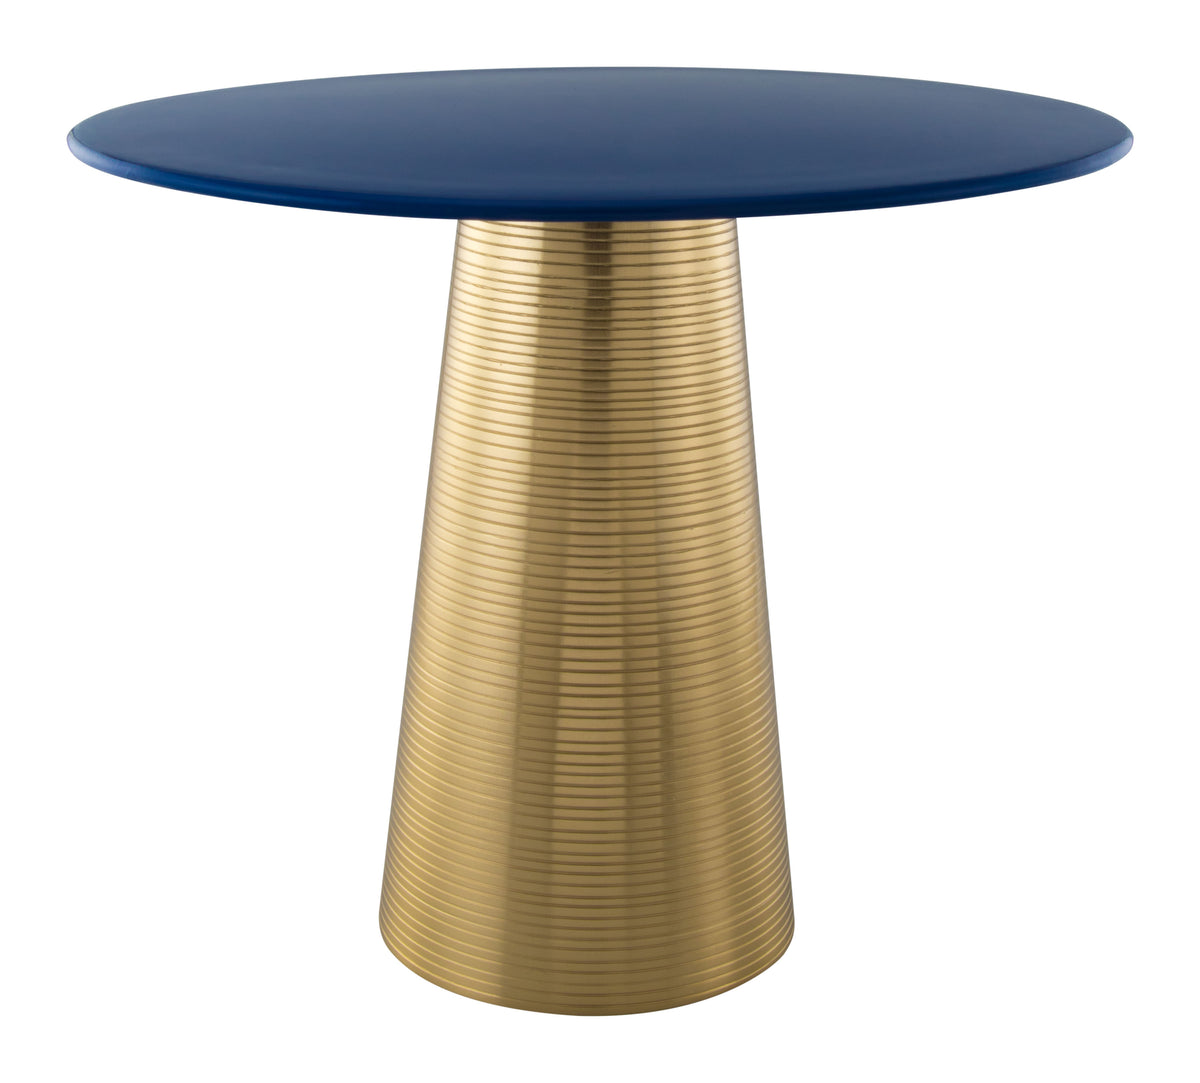 Reo Side Table Dark Blue & Gold